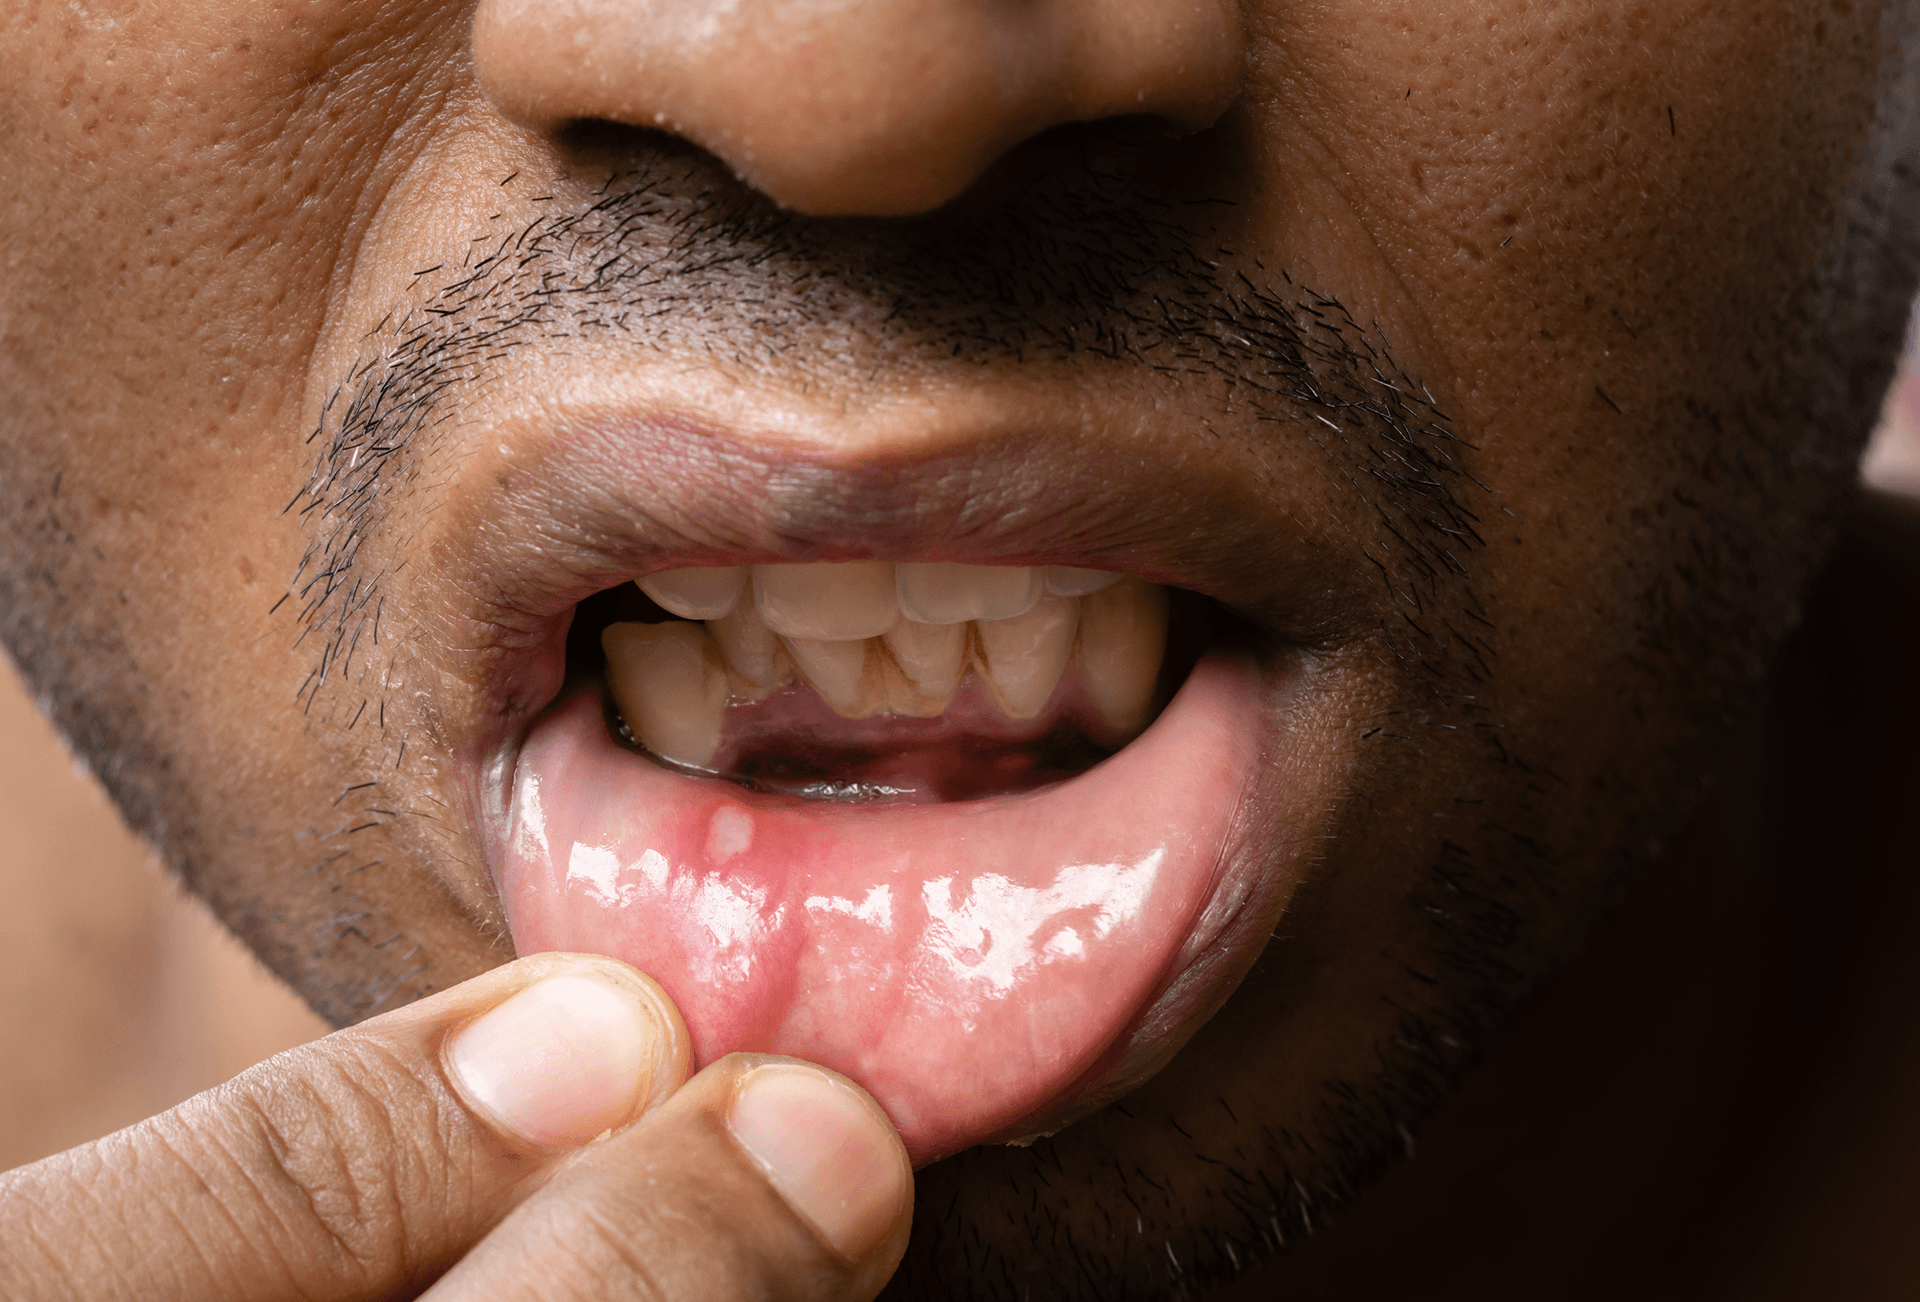 man holding lip down to show mouth ulcer